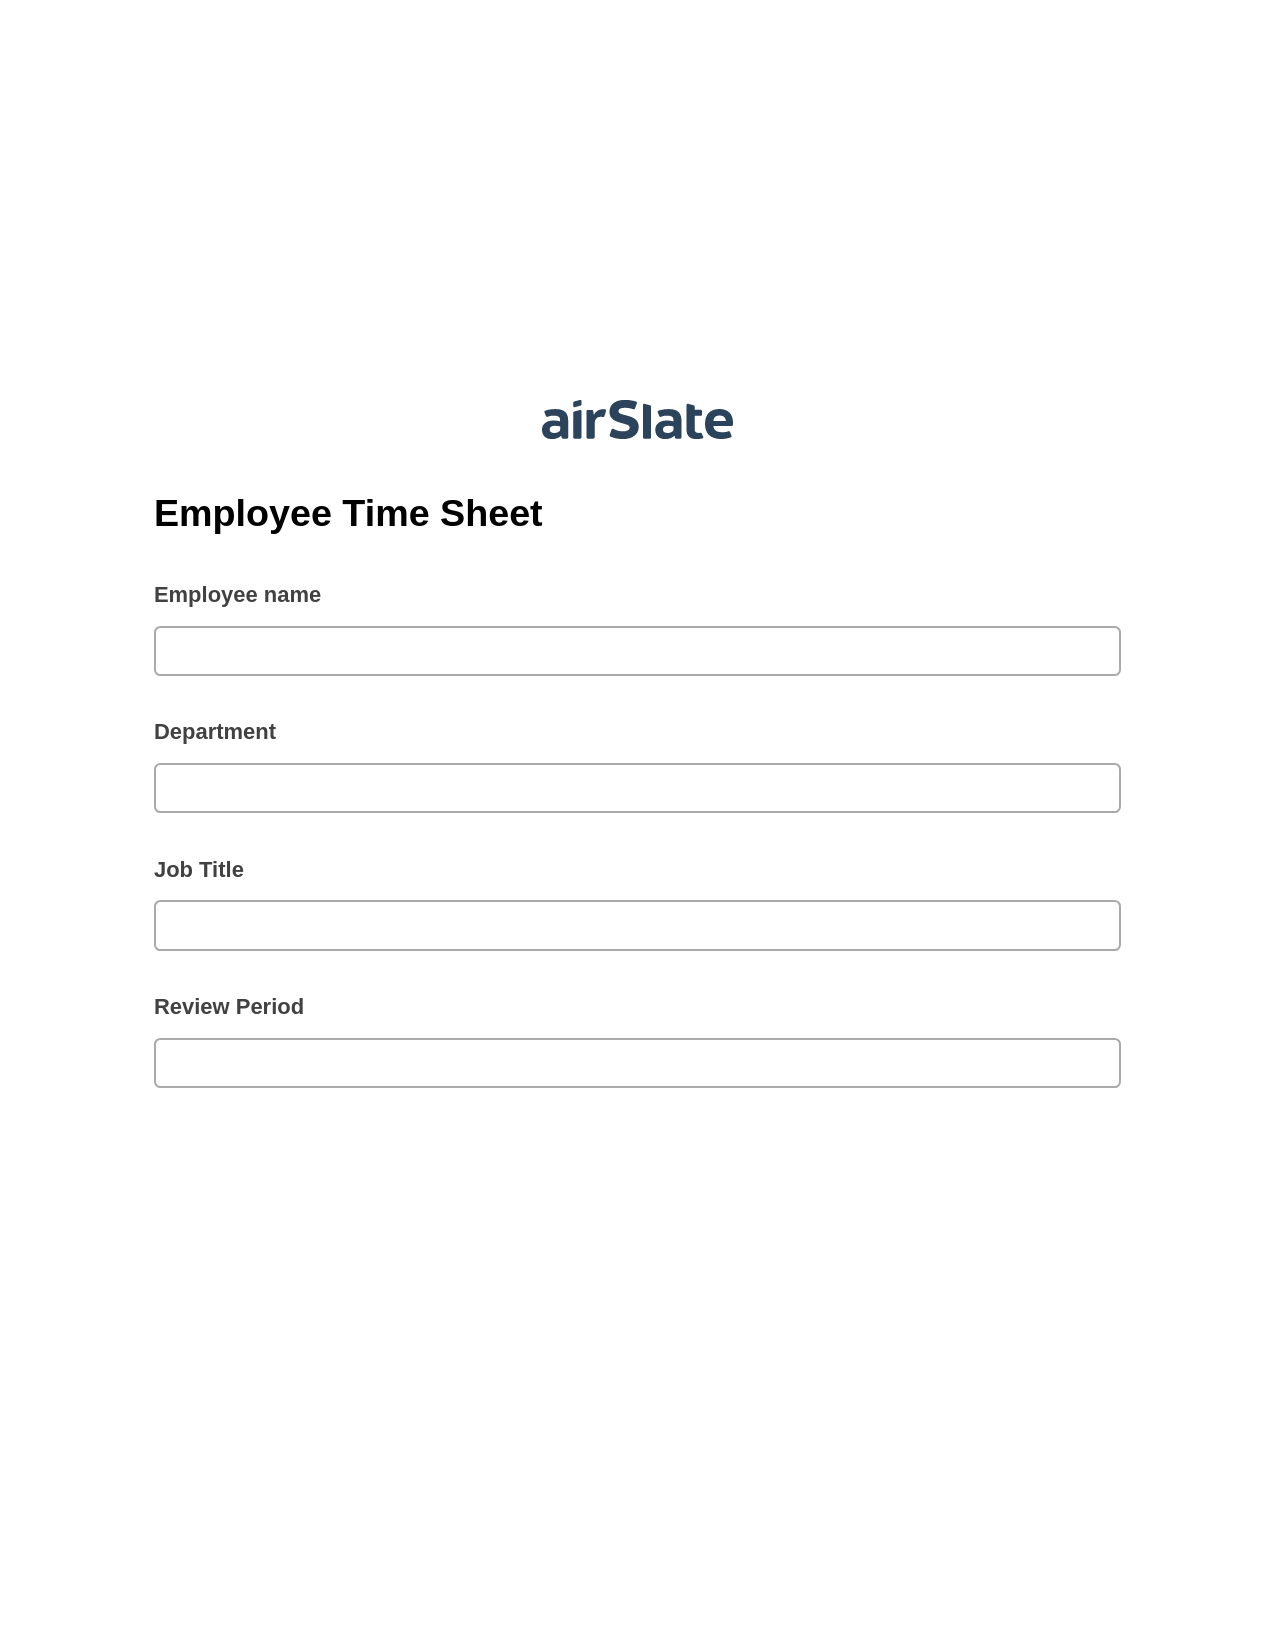 Multirole Employee Time Sheet Pre-fill from Smartsheet Bot, Update Audit Trail Bot, Archive to Google Drive Bot